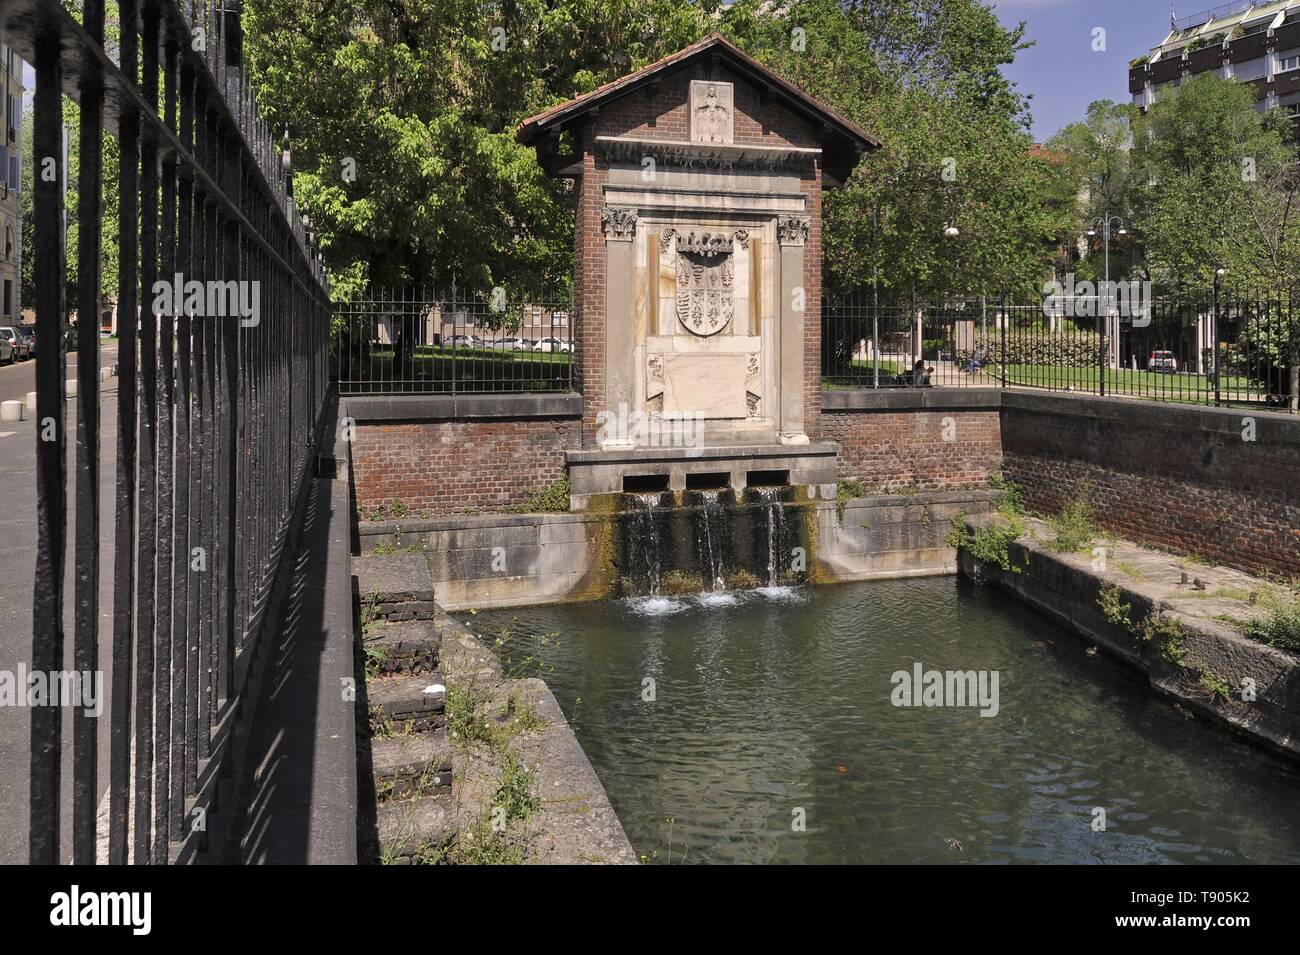 Milan (Italy), the remains of the Conca di Varenna, ancient work of hydraulic engineering near the Darsena basin, built between 1551 and 1558 to transport materials for the construction of the Duomo cathedral Stock Photo